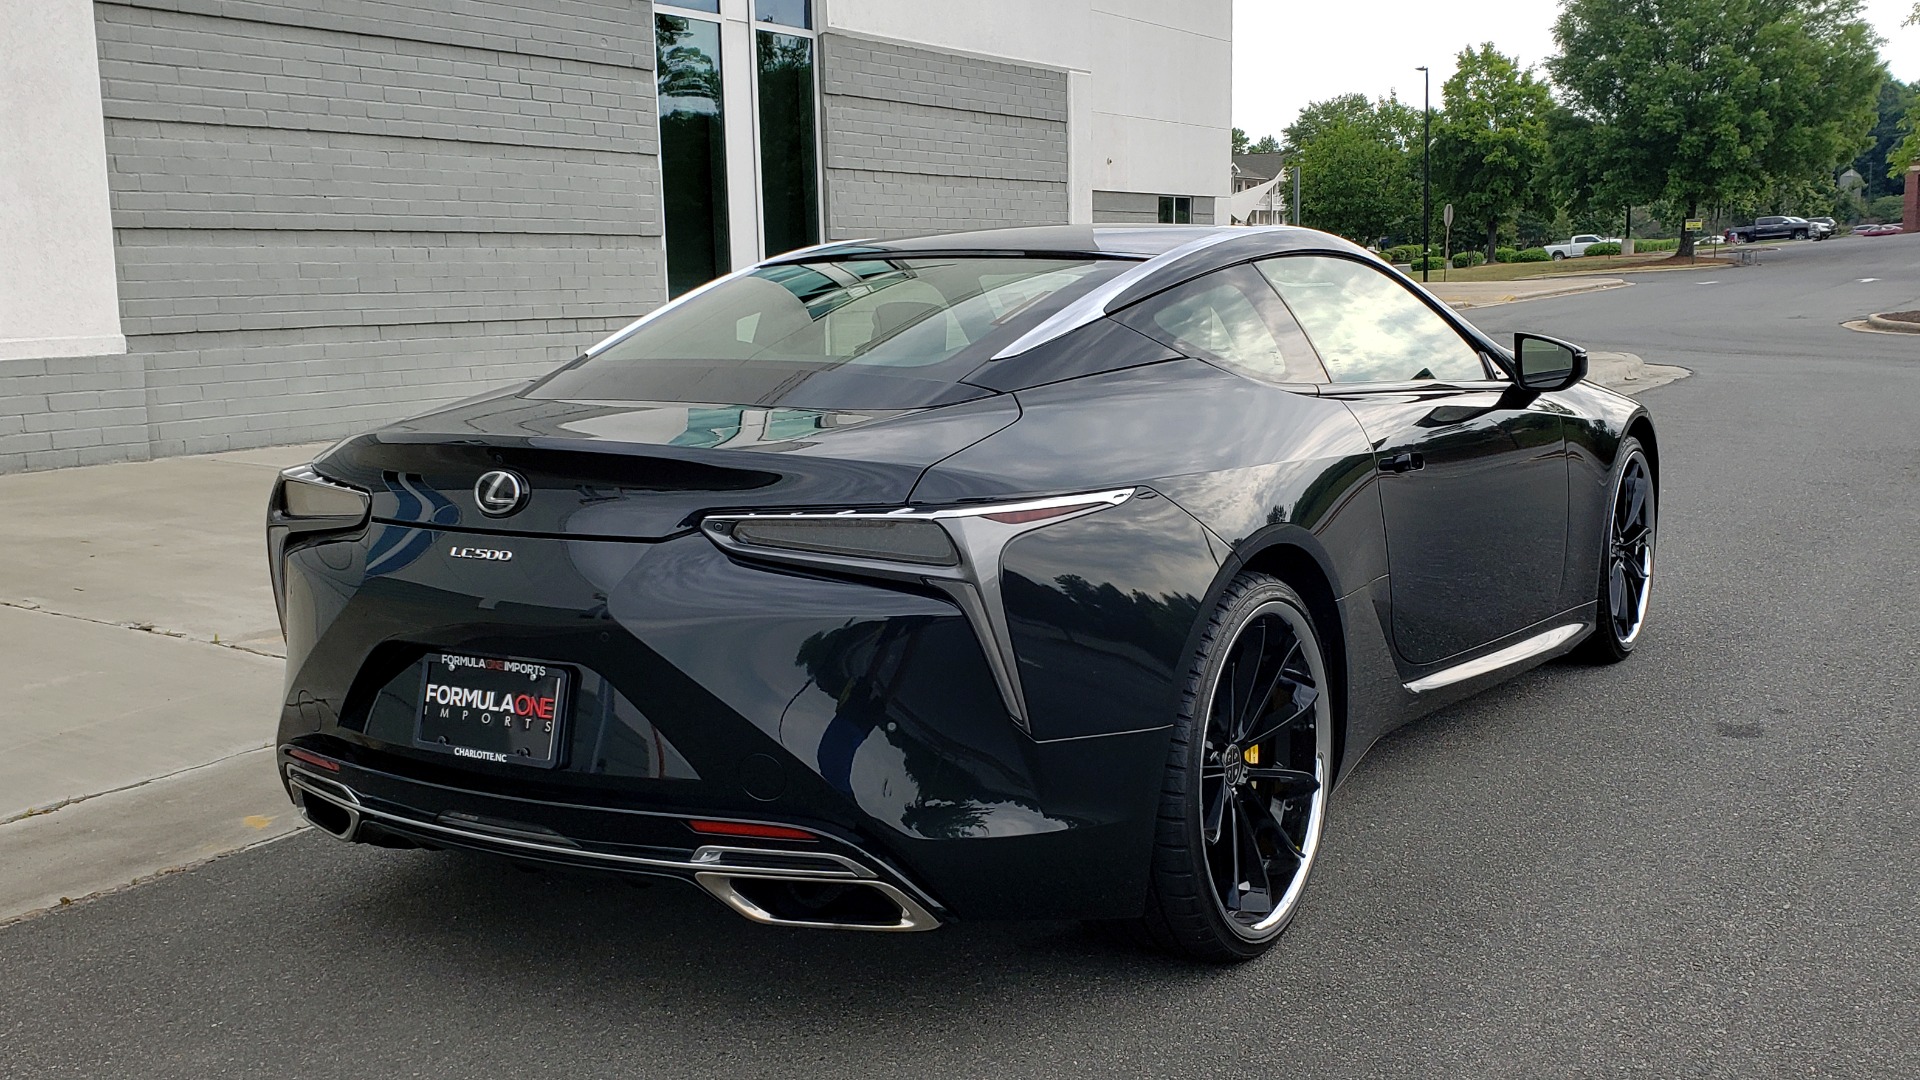 Used 2018 Lexus LC 500 COUPE / 5.0L V8 (471HP) / 10-SPD AUTO / HUD / SUNROOF / REARVIEW for sale Sold at Formula Imports in Charlotte NC 28227 2